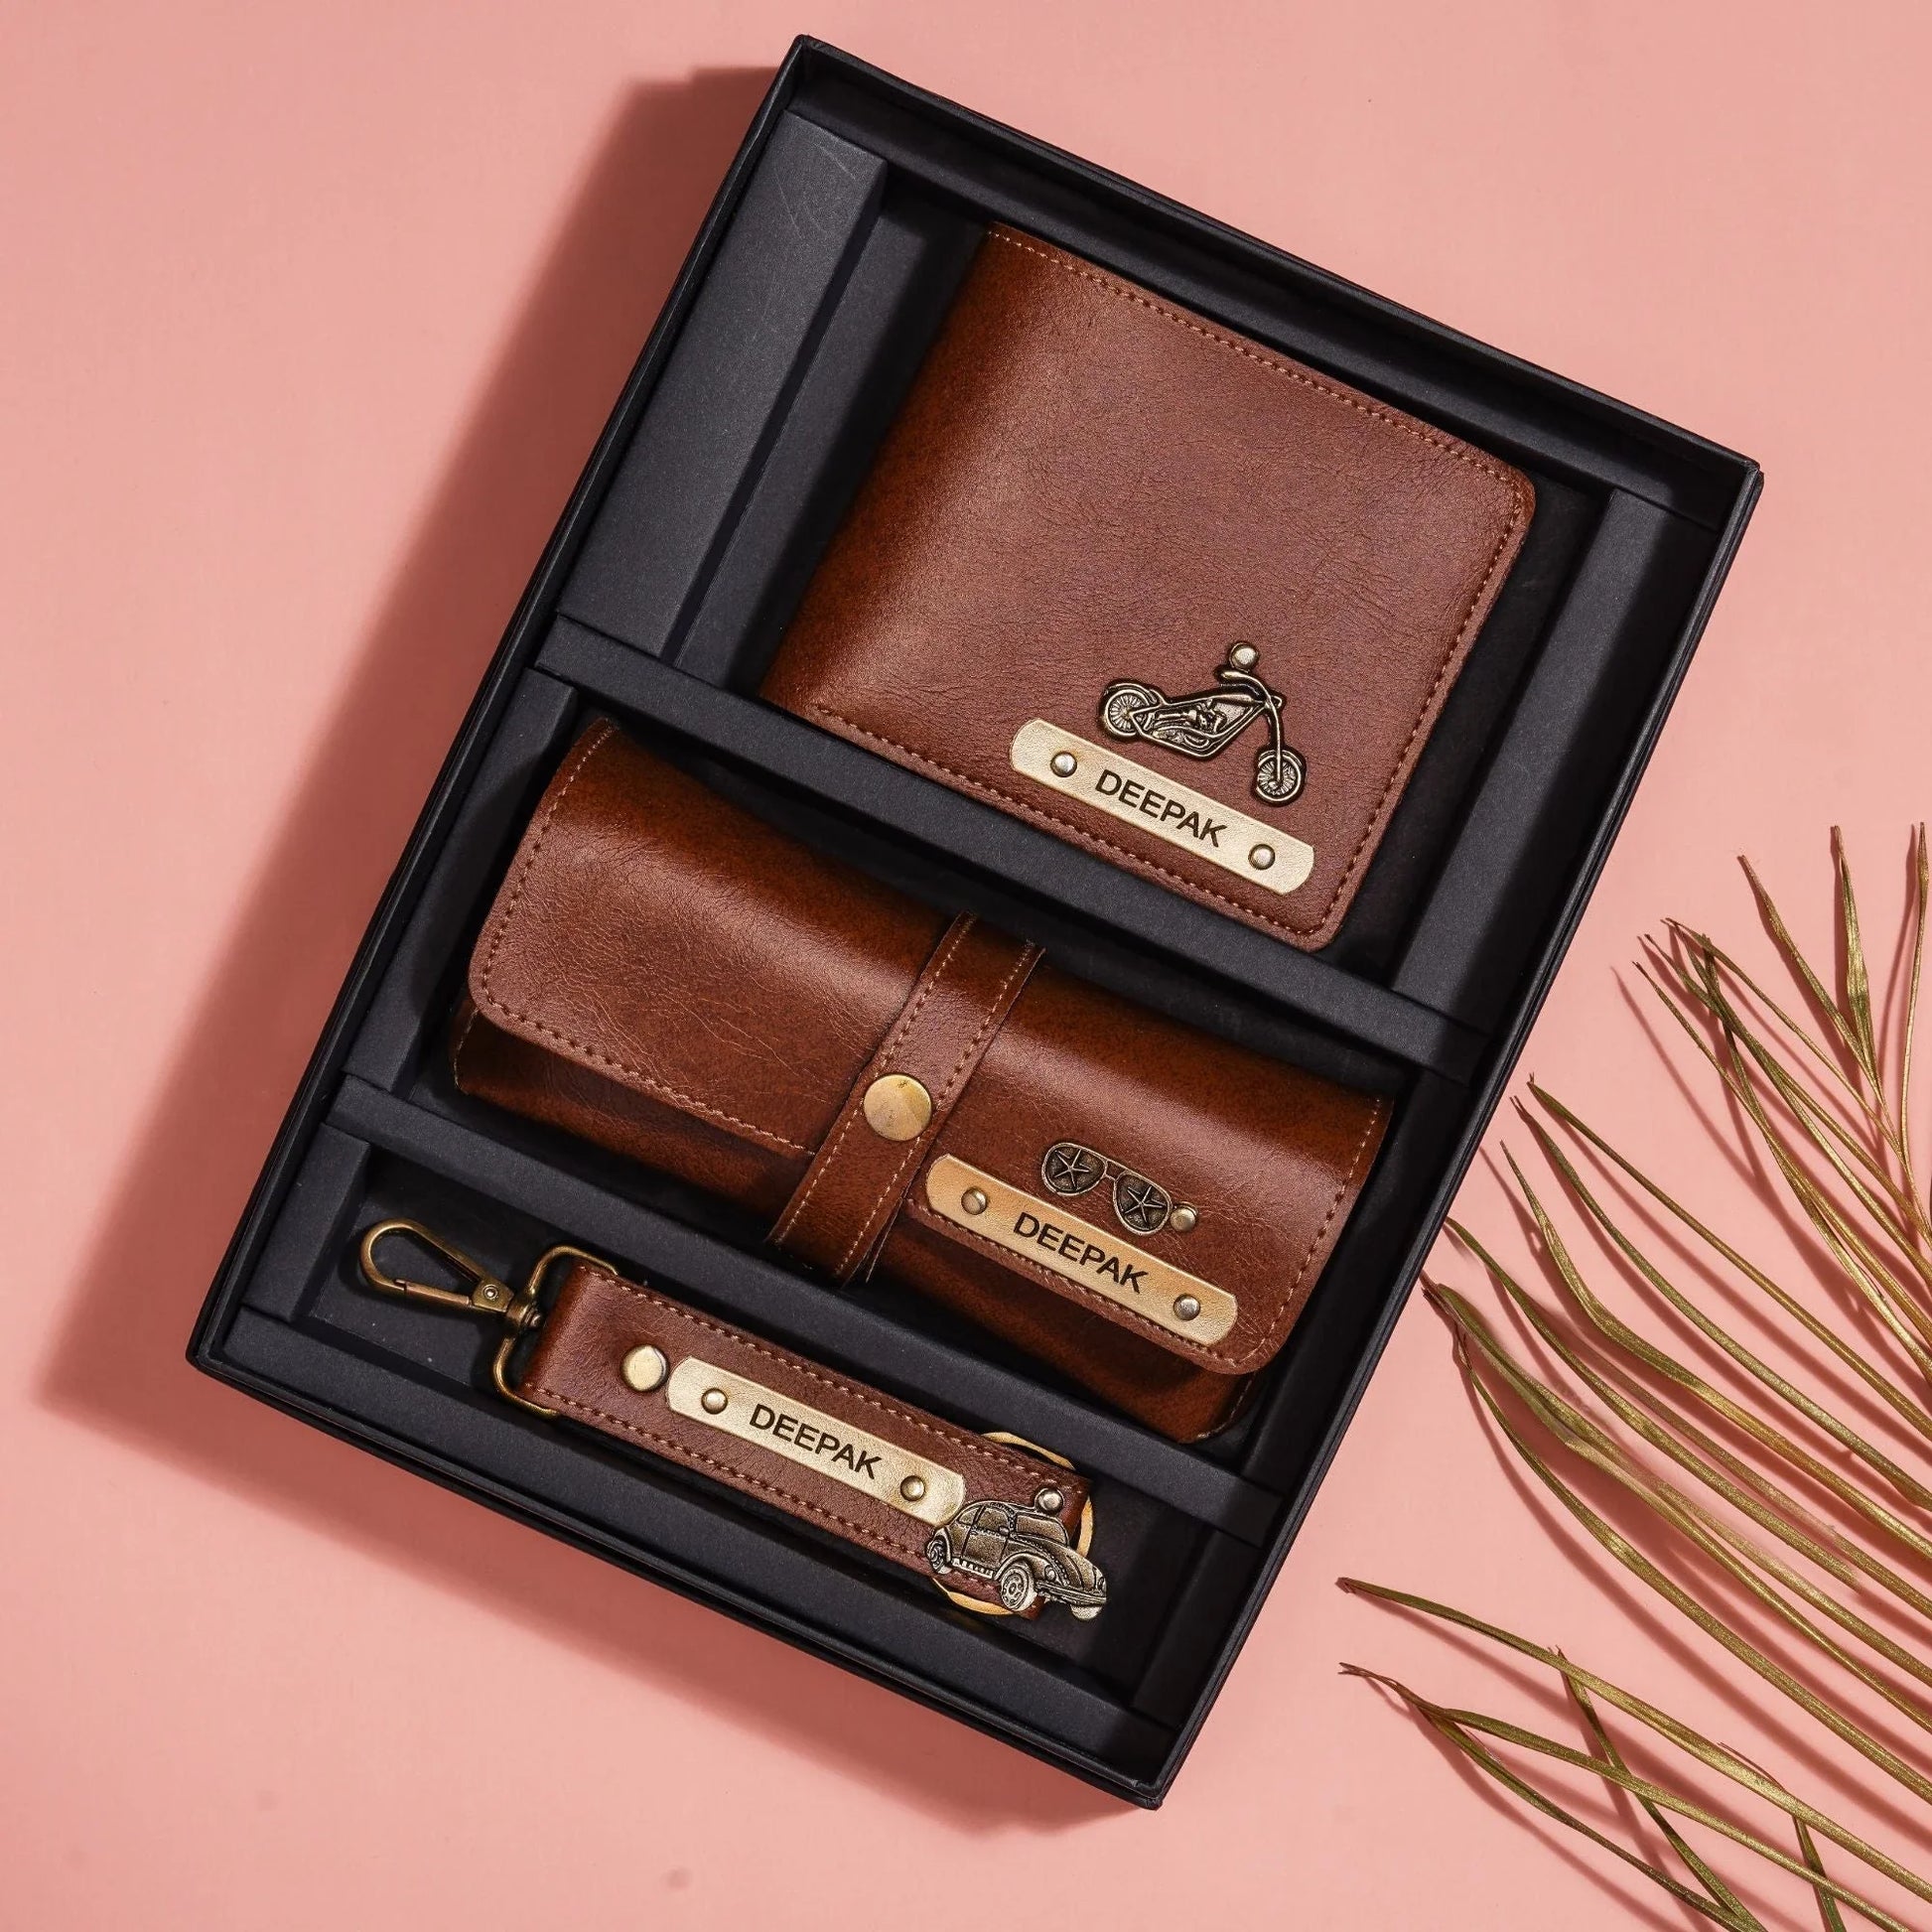 Make a style statement with our customized men's combo! This carefully curated set can be personalized with your choice of initials, monogram or design.